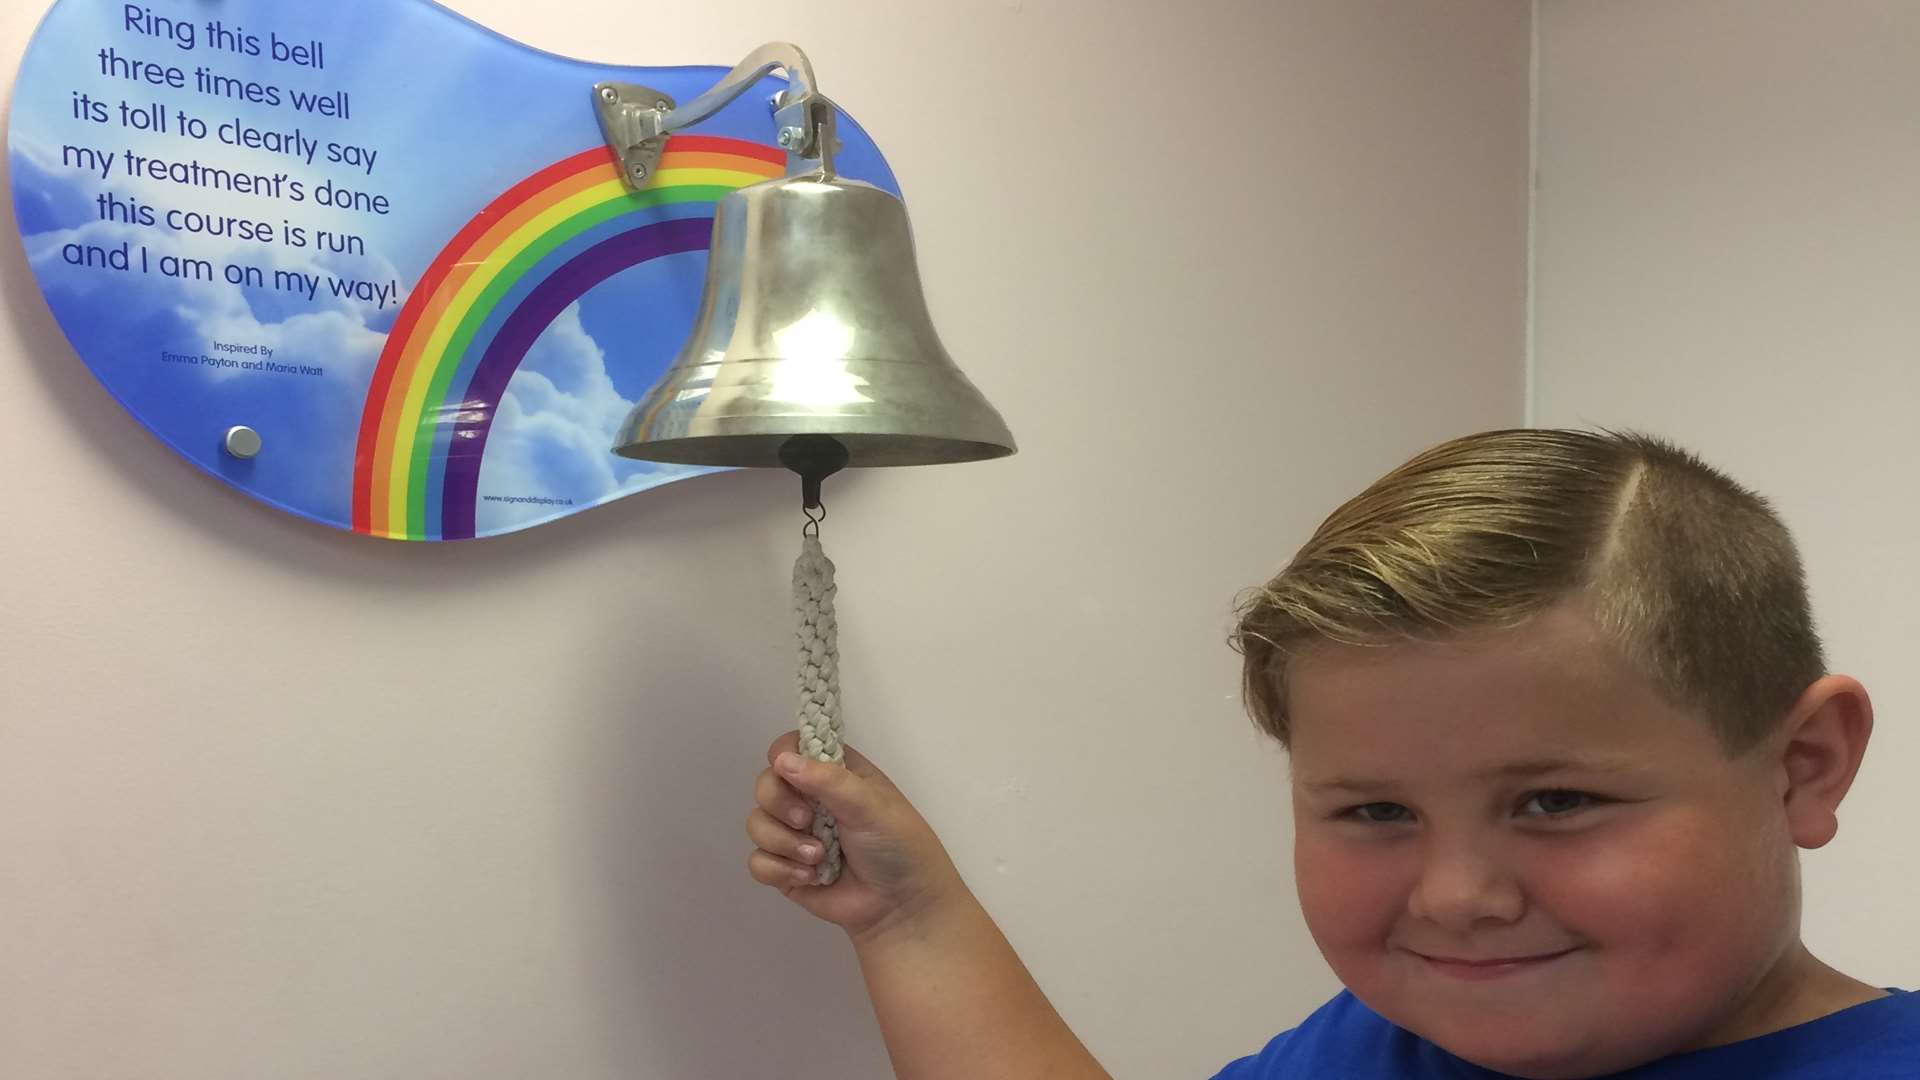 Aaron Lindridge, 8, ringing the End of Treatment bell after five years free of cancer